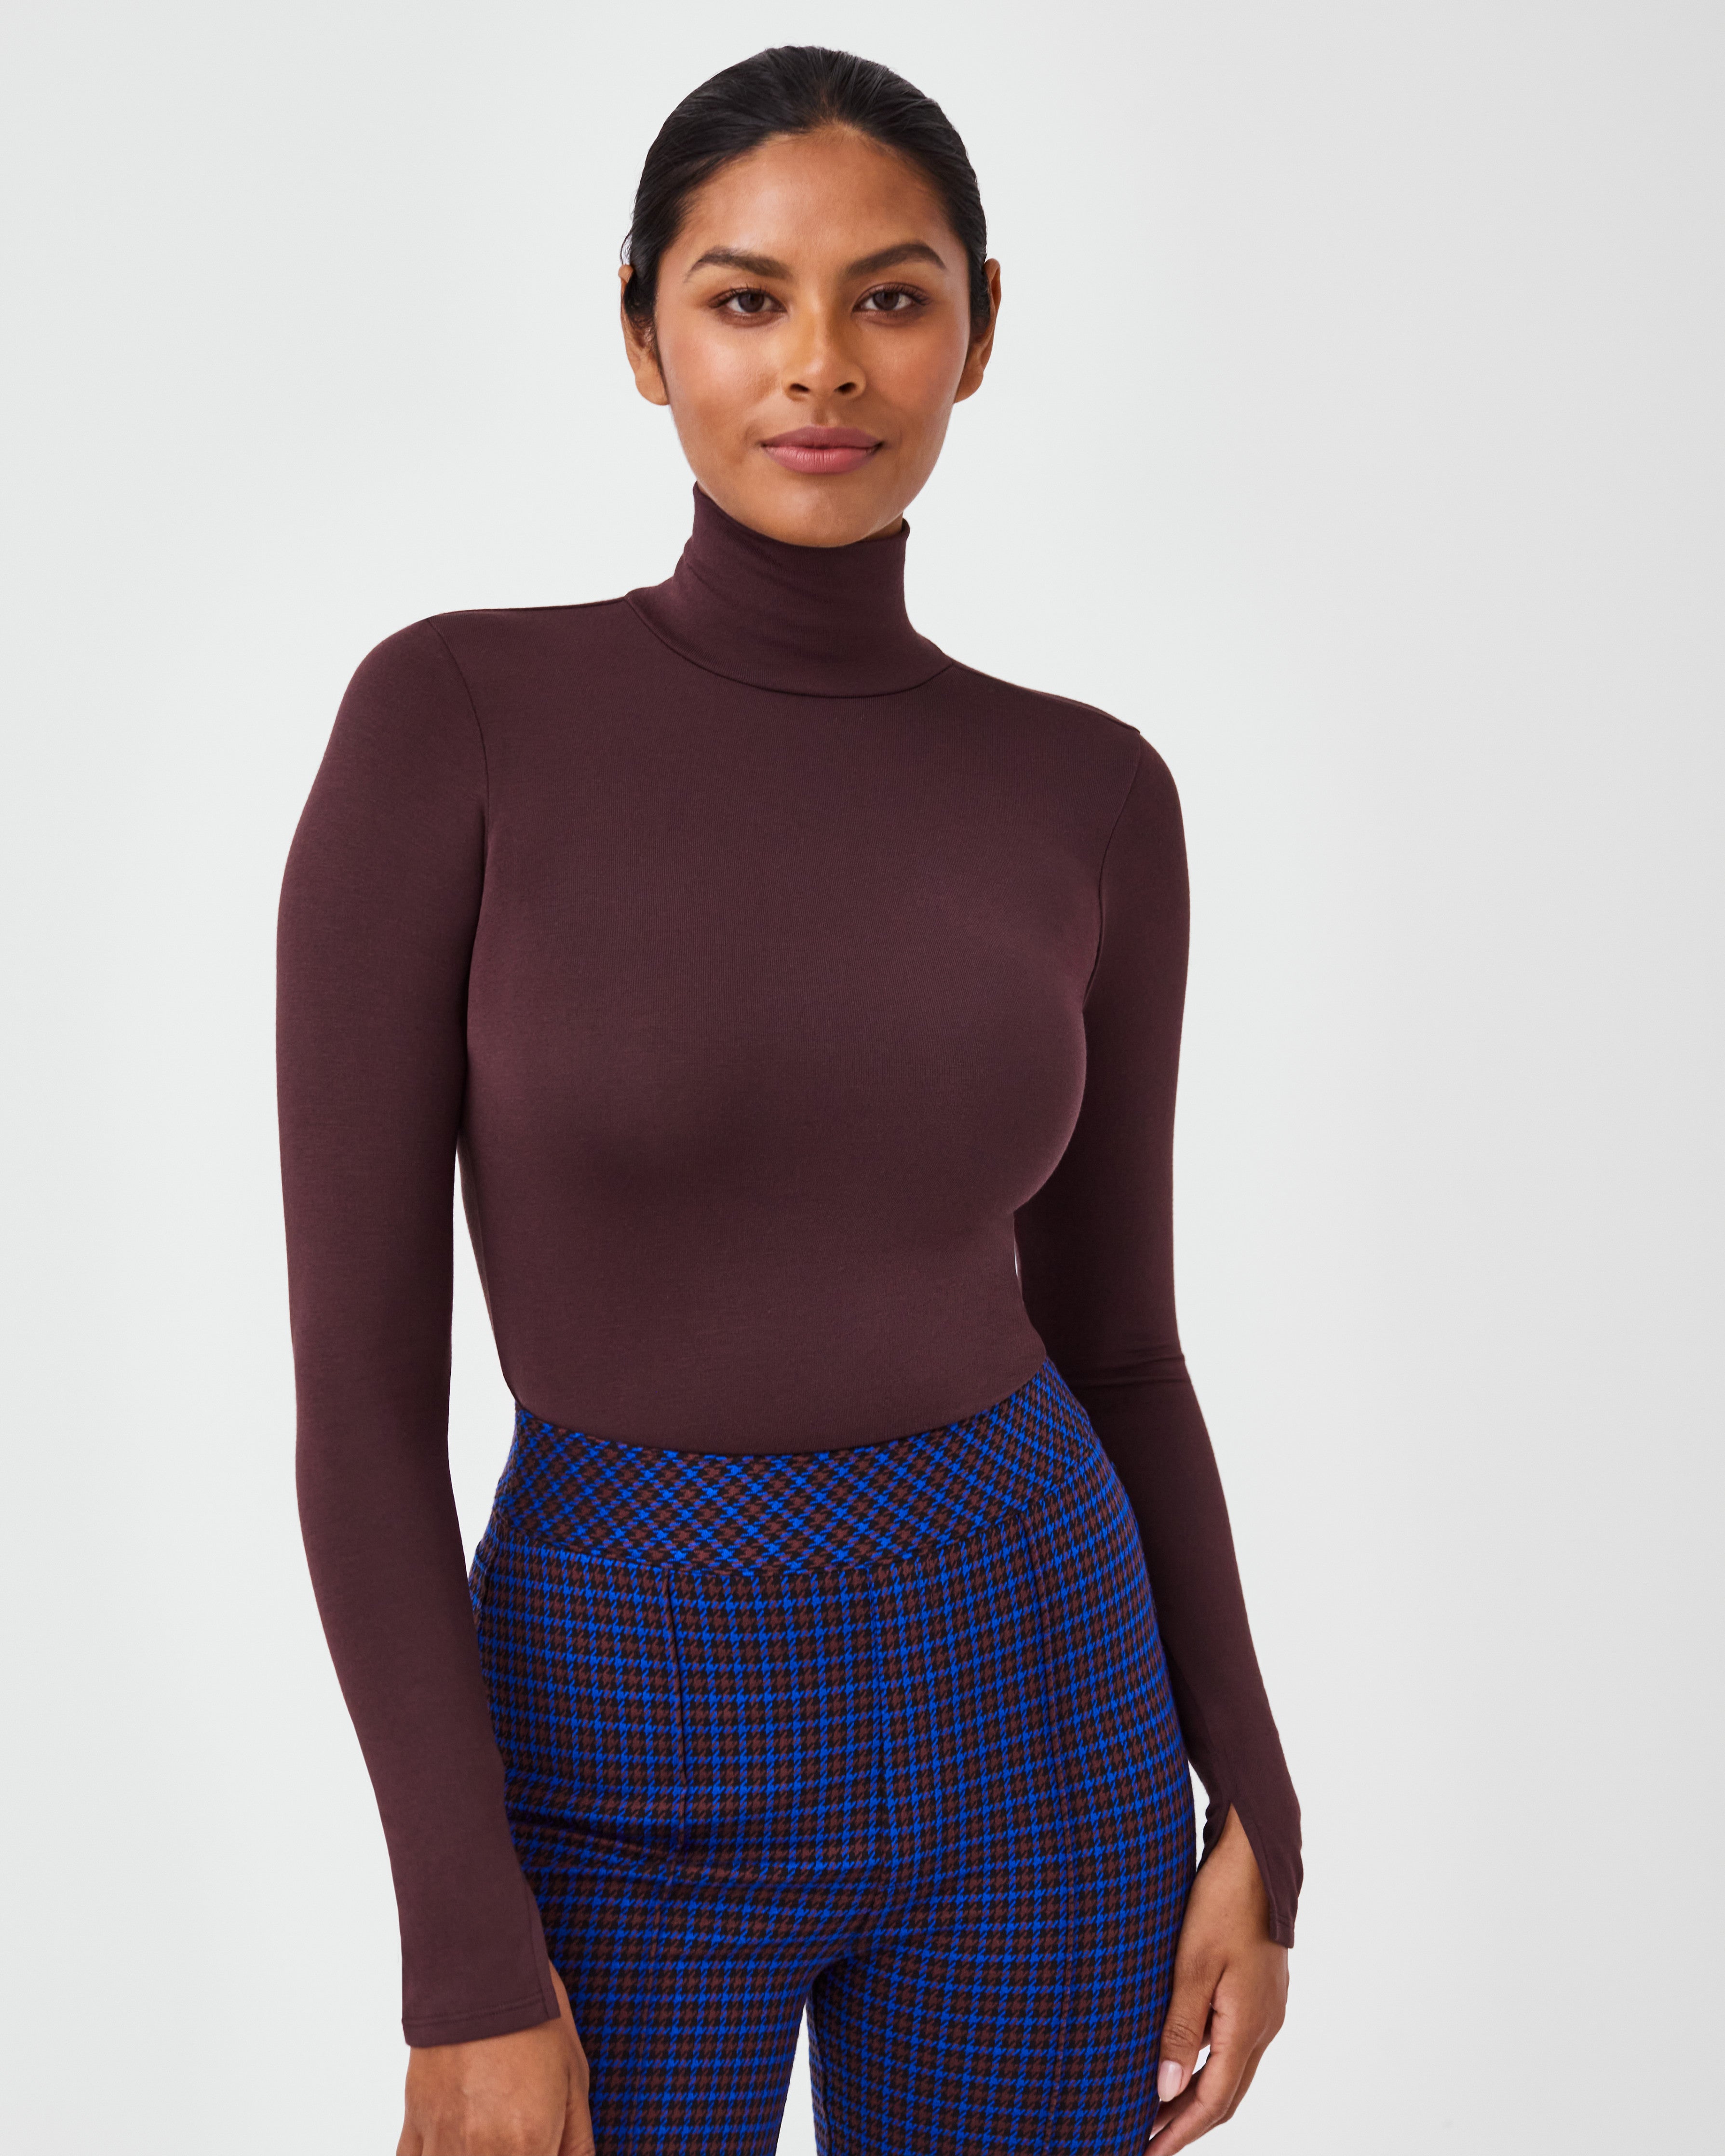 Spanx - you did it again! The new Air Essentials turtleneck tunic